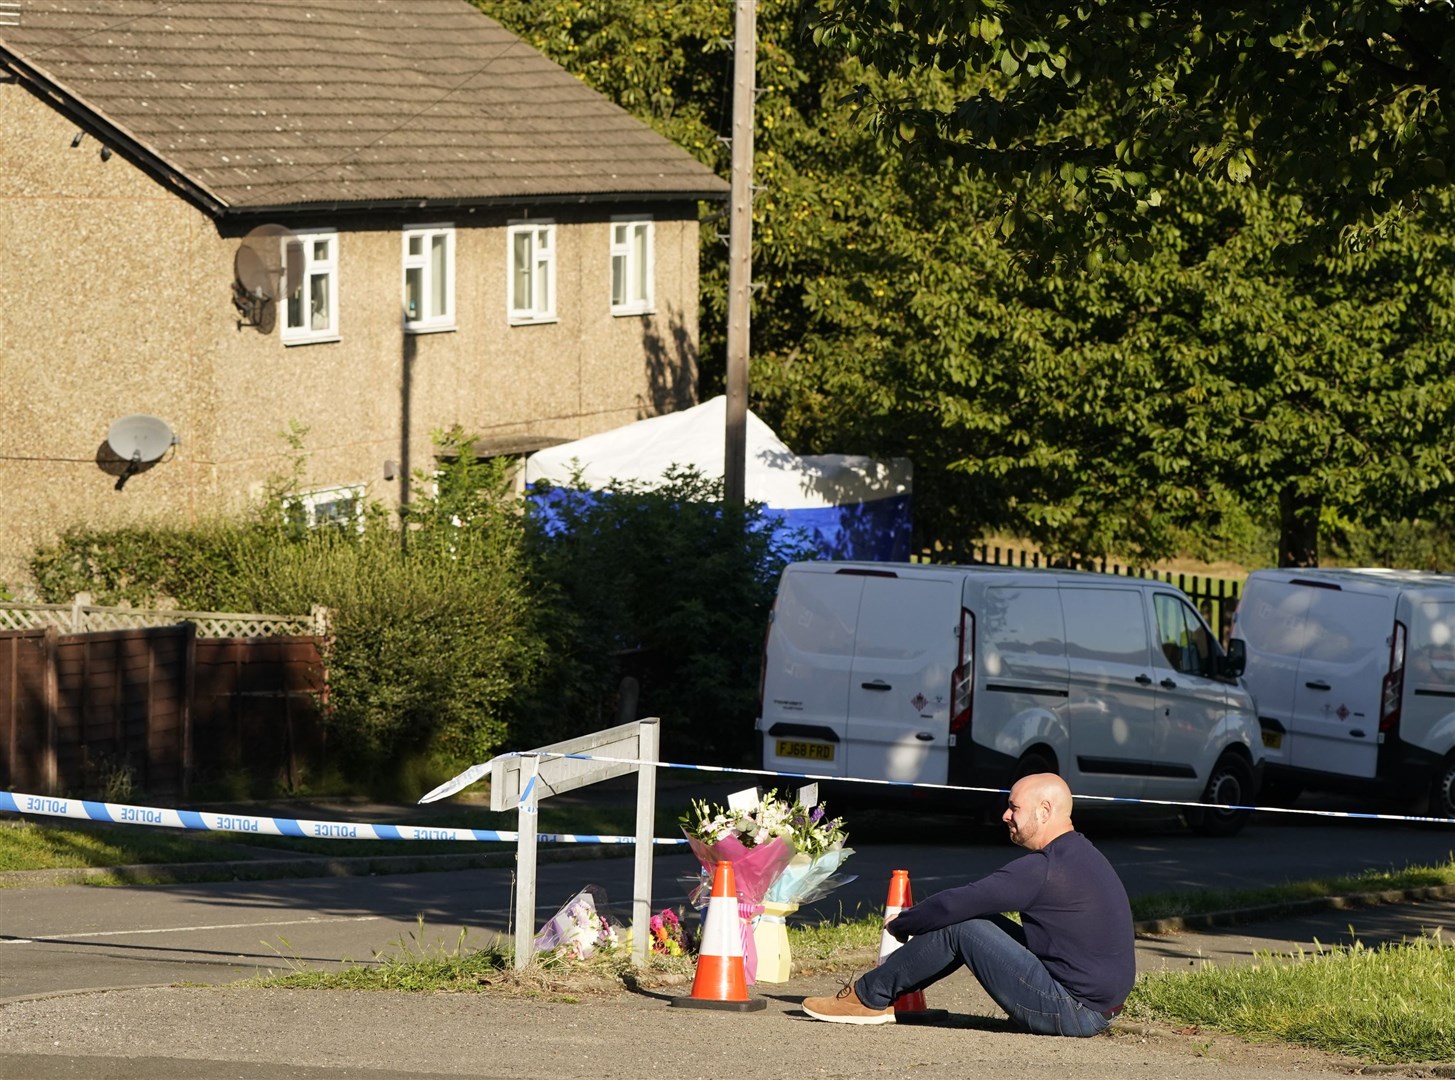 The father to some of the victims leaves flowers at the scene (Danny Lawson/PA)